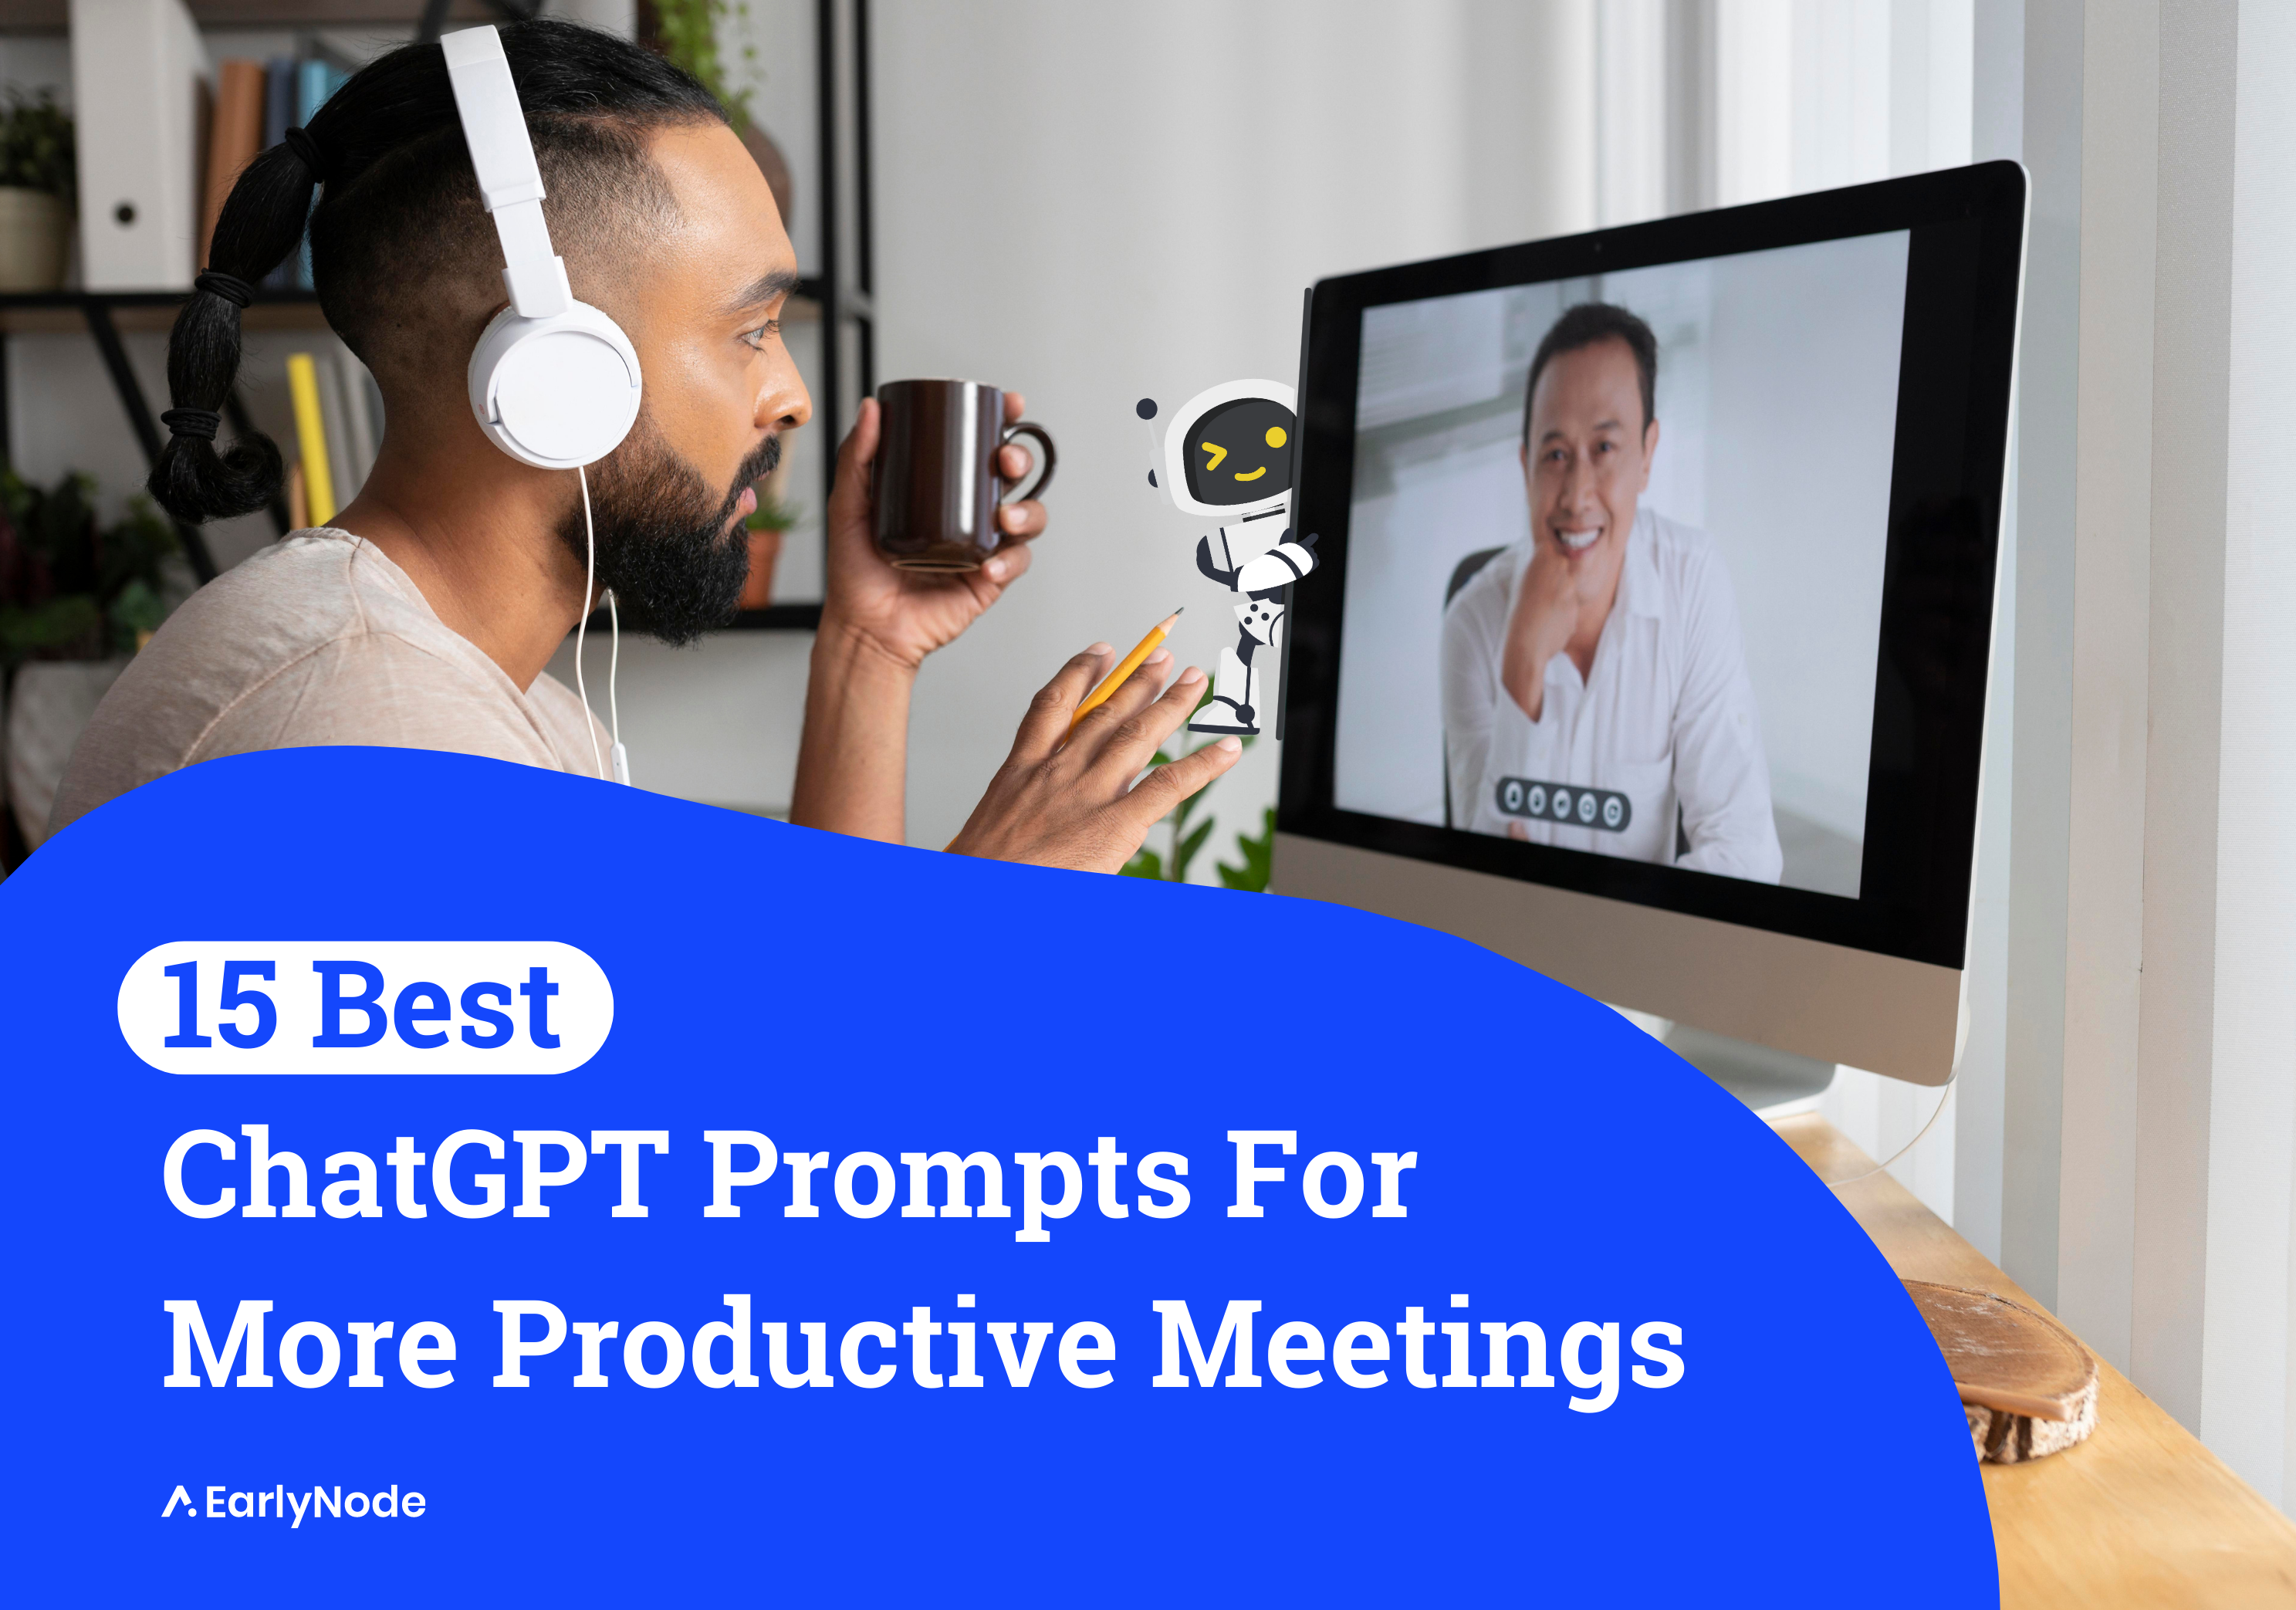 15 ChatGPT Prompts For More Productive Meetings